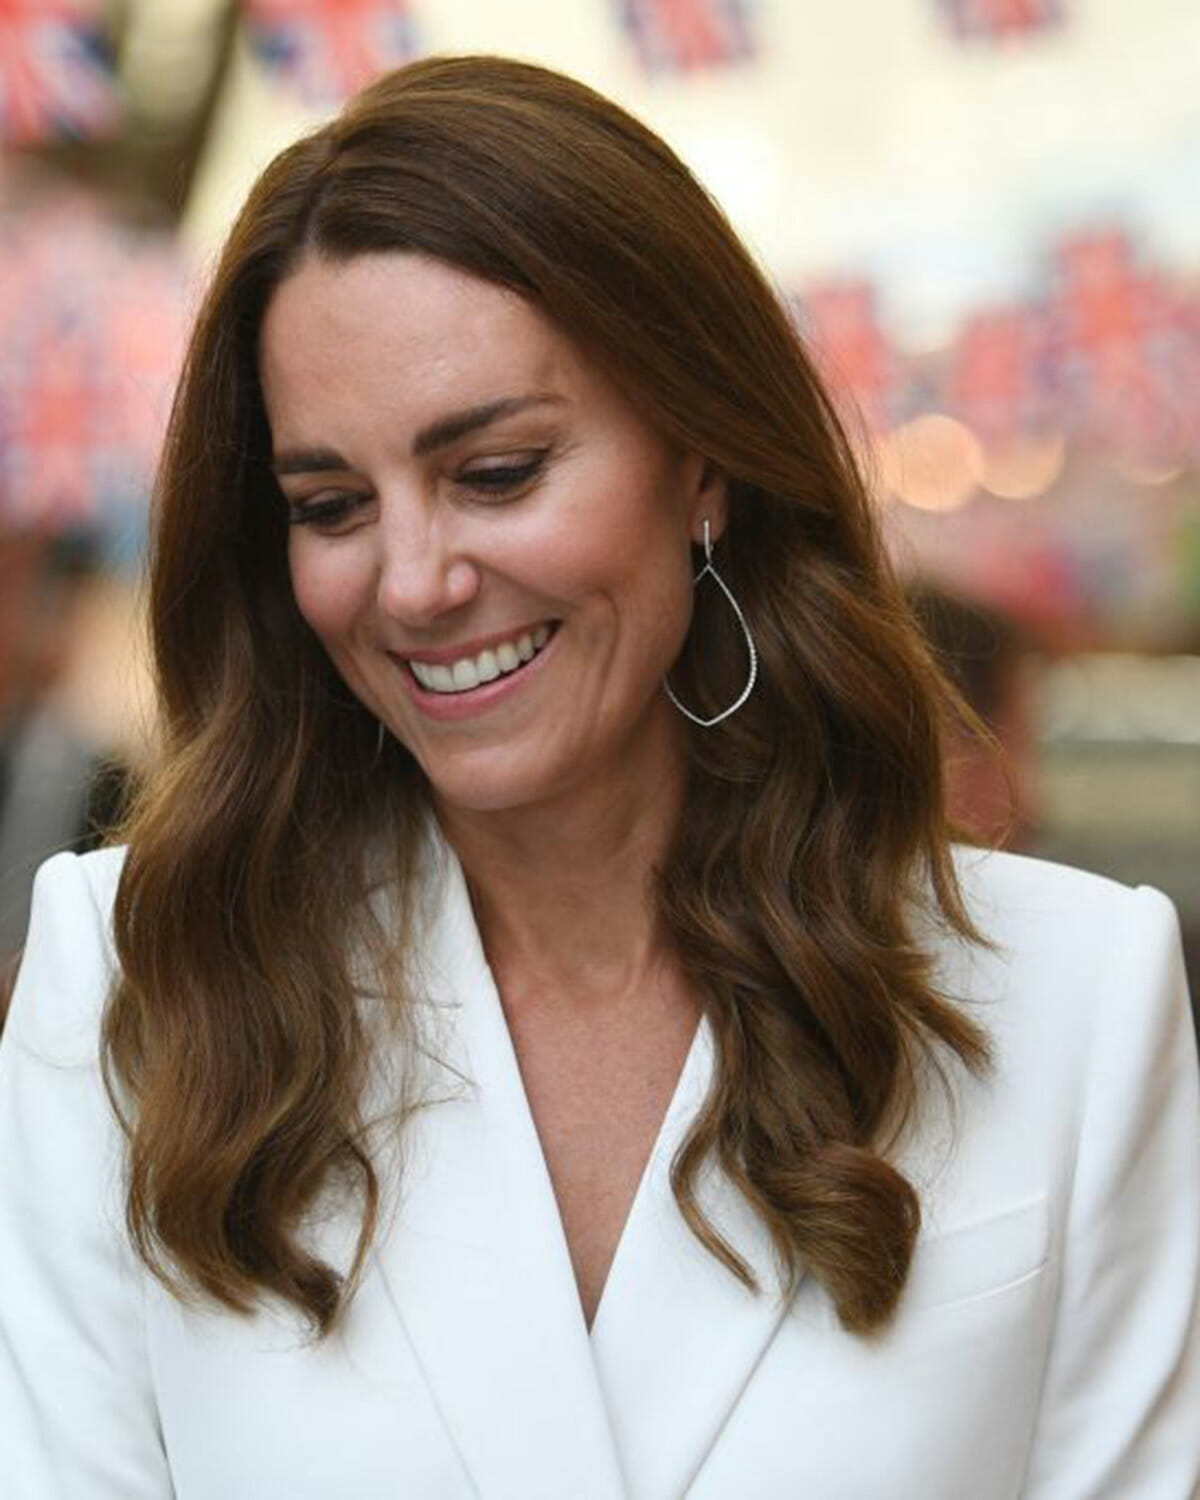 Kate Middleton's best jewellery moments